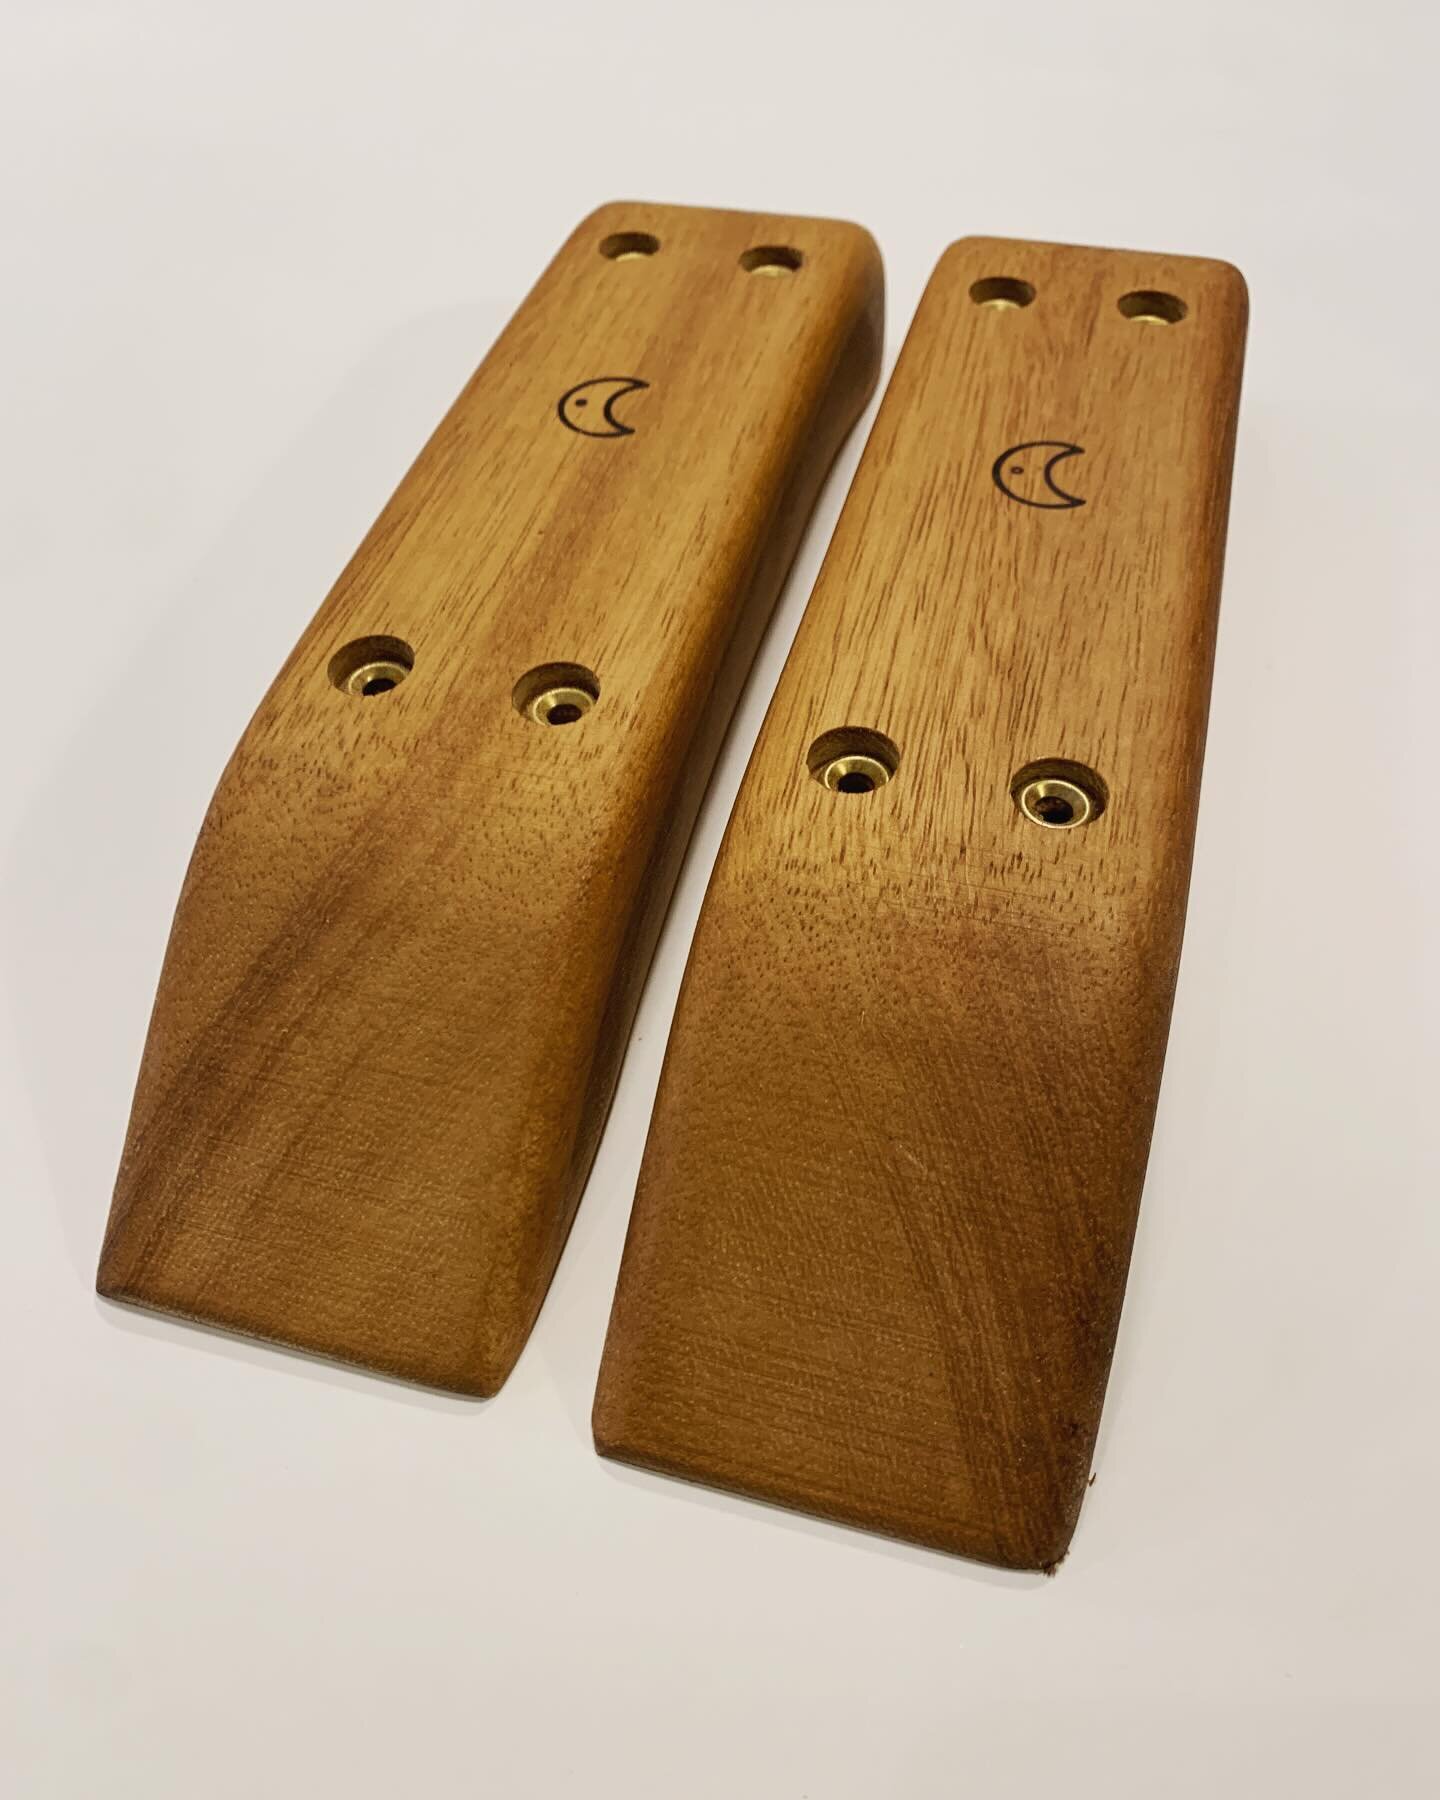 Had a bit of a restock on the webshop. Been busy trying to keep up with orders, but over the next week or so more will be up. Brushes, sets, and the new crimp game! 
Here is a Nice big pair of iroko pinches. Slightly incut on both sides to improve gr